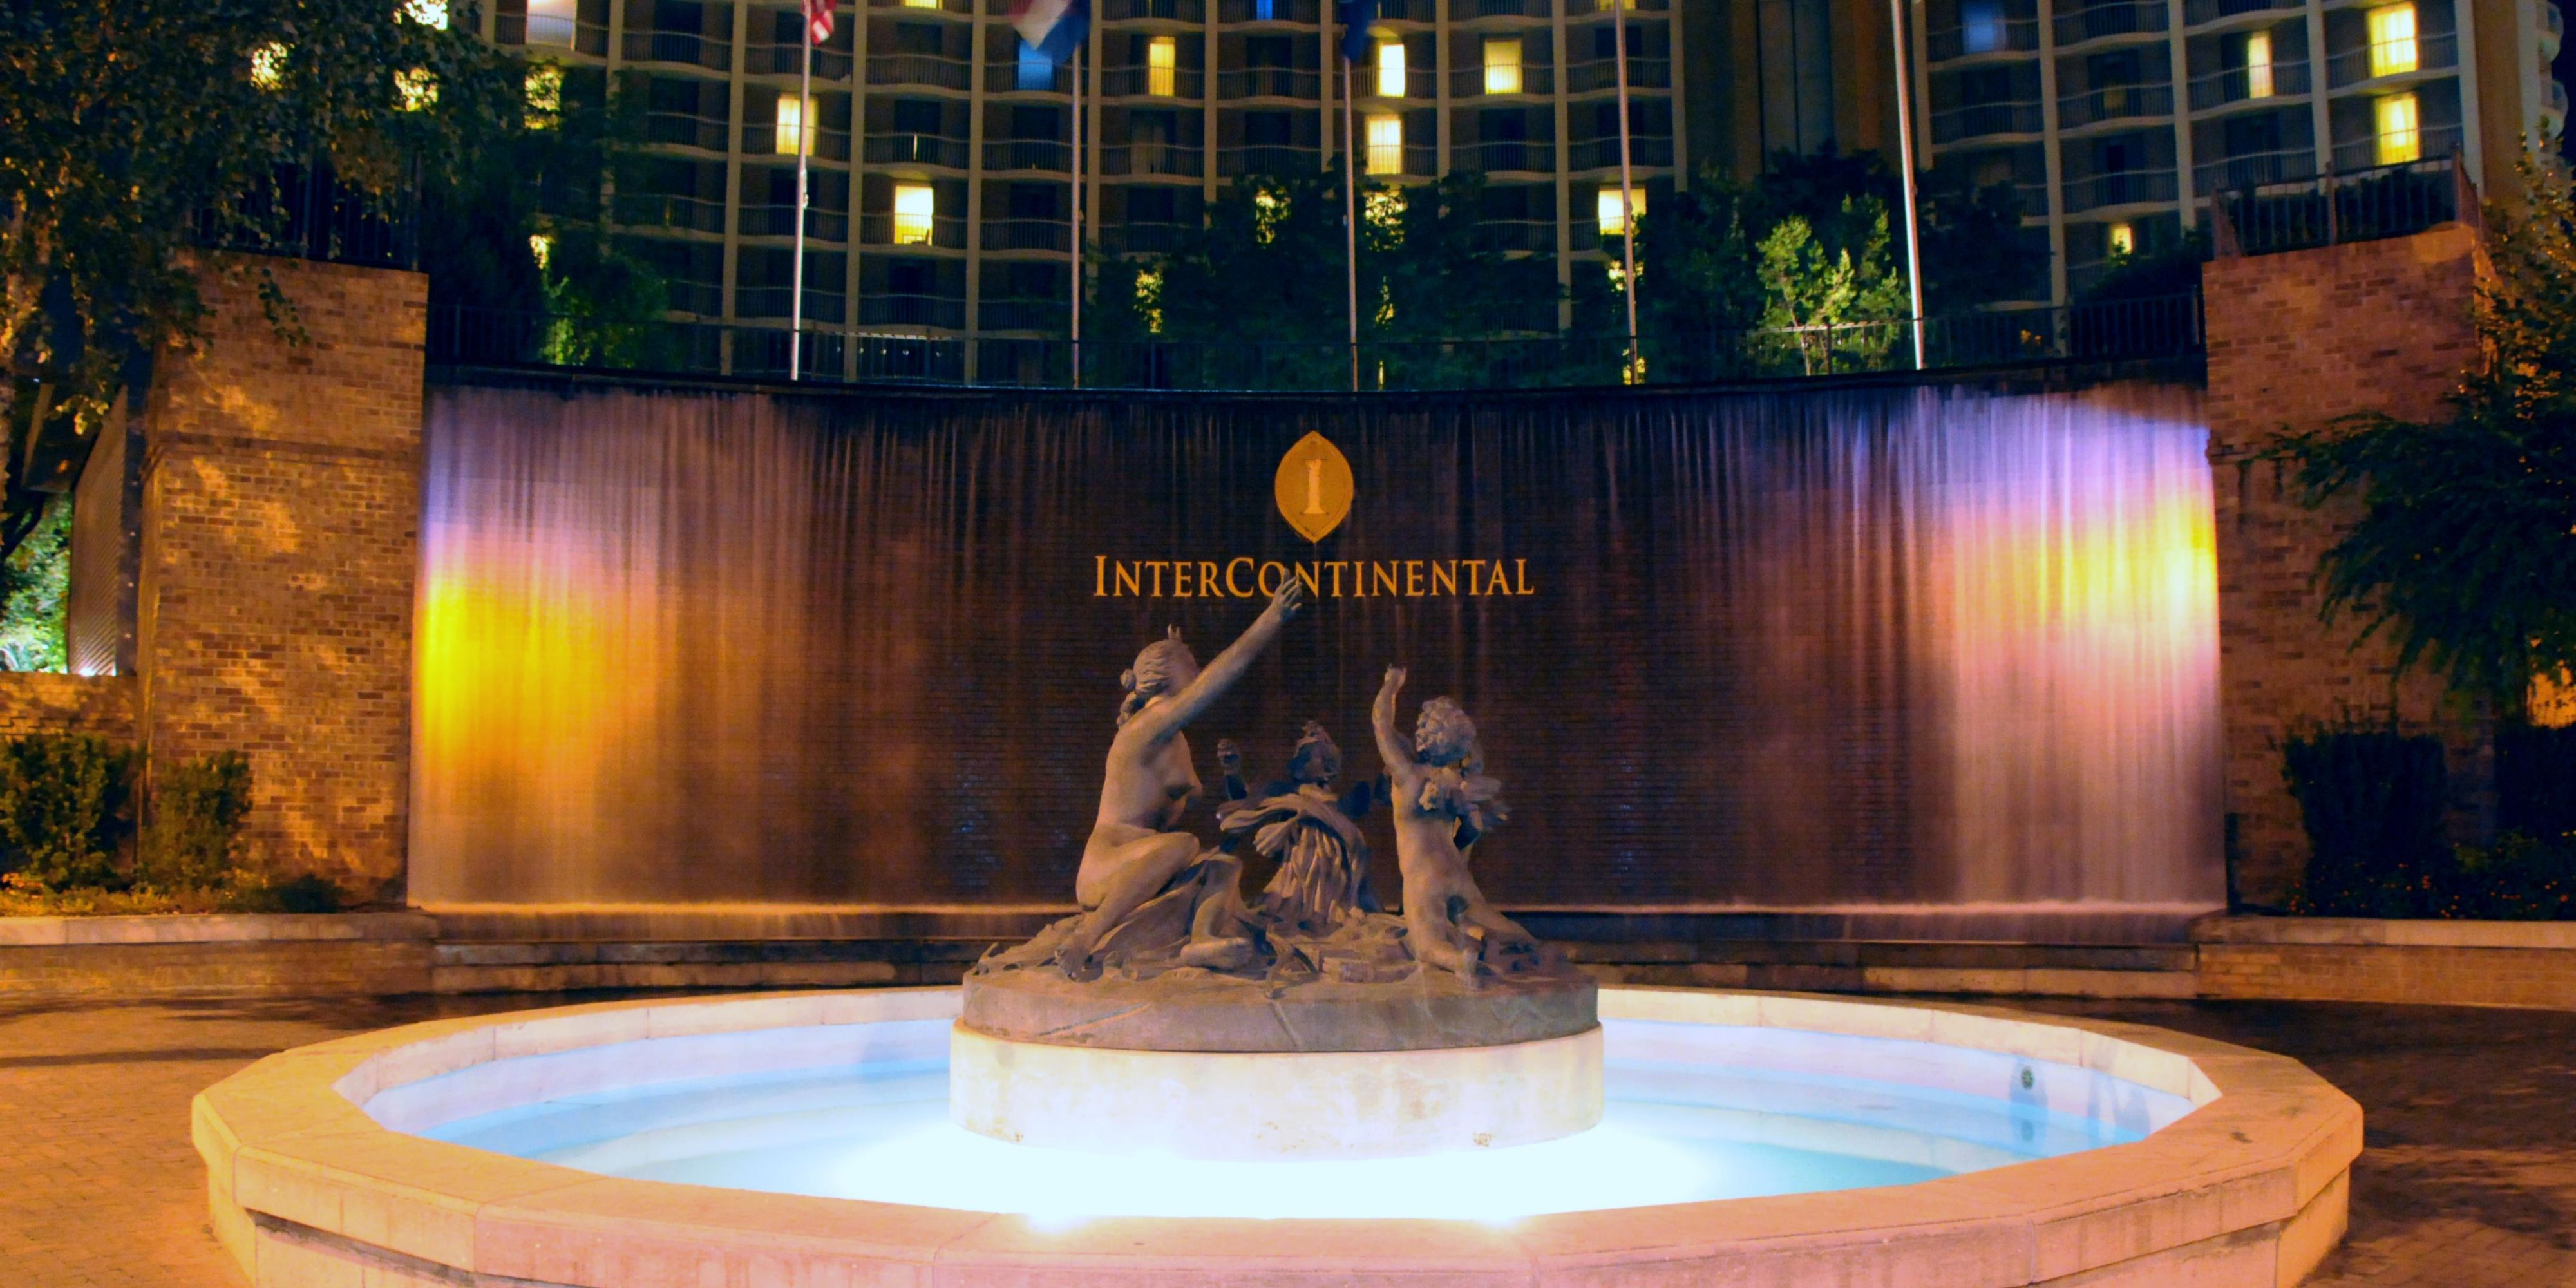 InterContinental Kansas City at the Plaza is celebrating our 50th Anniversary. Historic charm meets unrivaled elegance at our Country Club Plaza oasis. From our resort-style pool to our balconies, unwind amidst Midwestern flair and luxury. Help us toast to 50 years of luxury on the the Plaza.